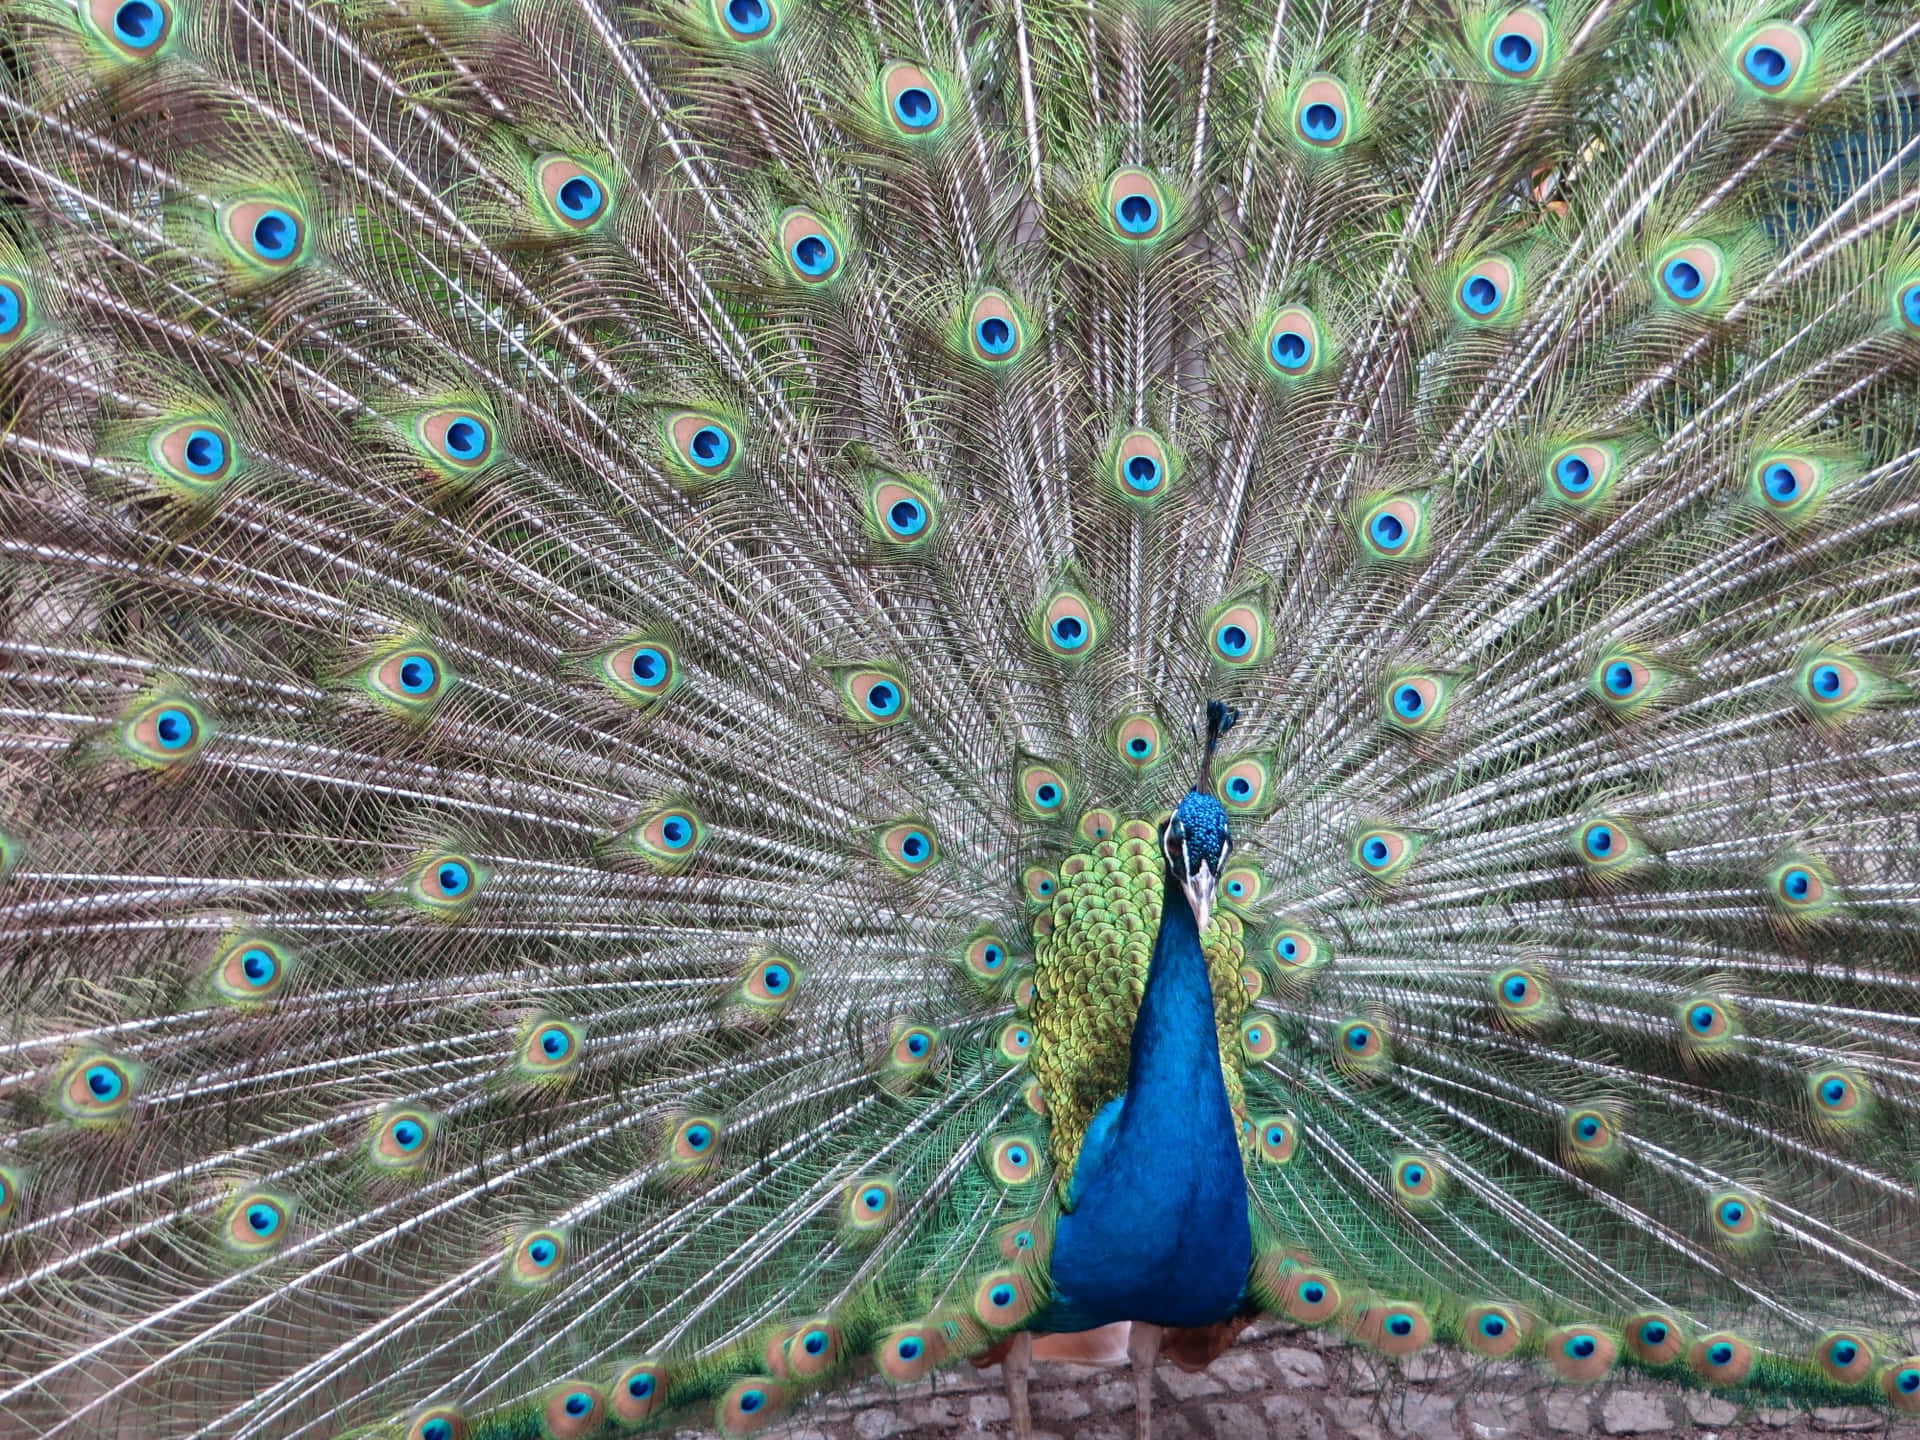 A proud peacock shows off its multicolored feathers.